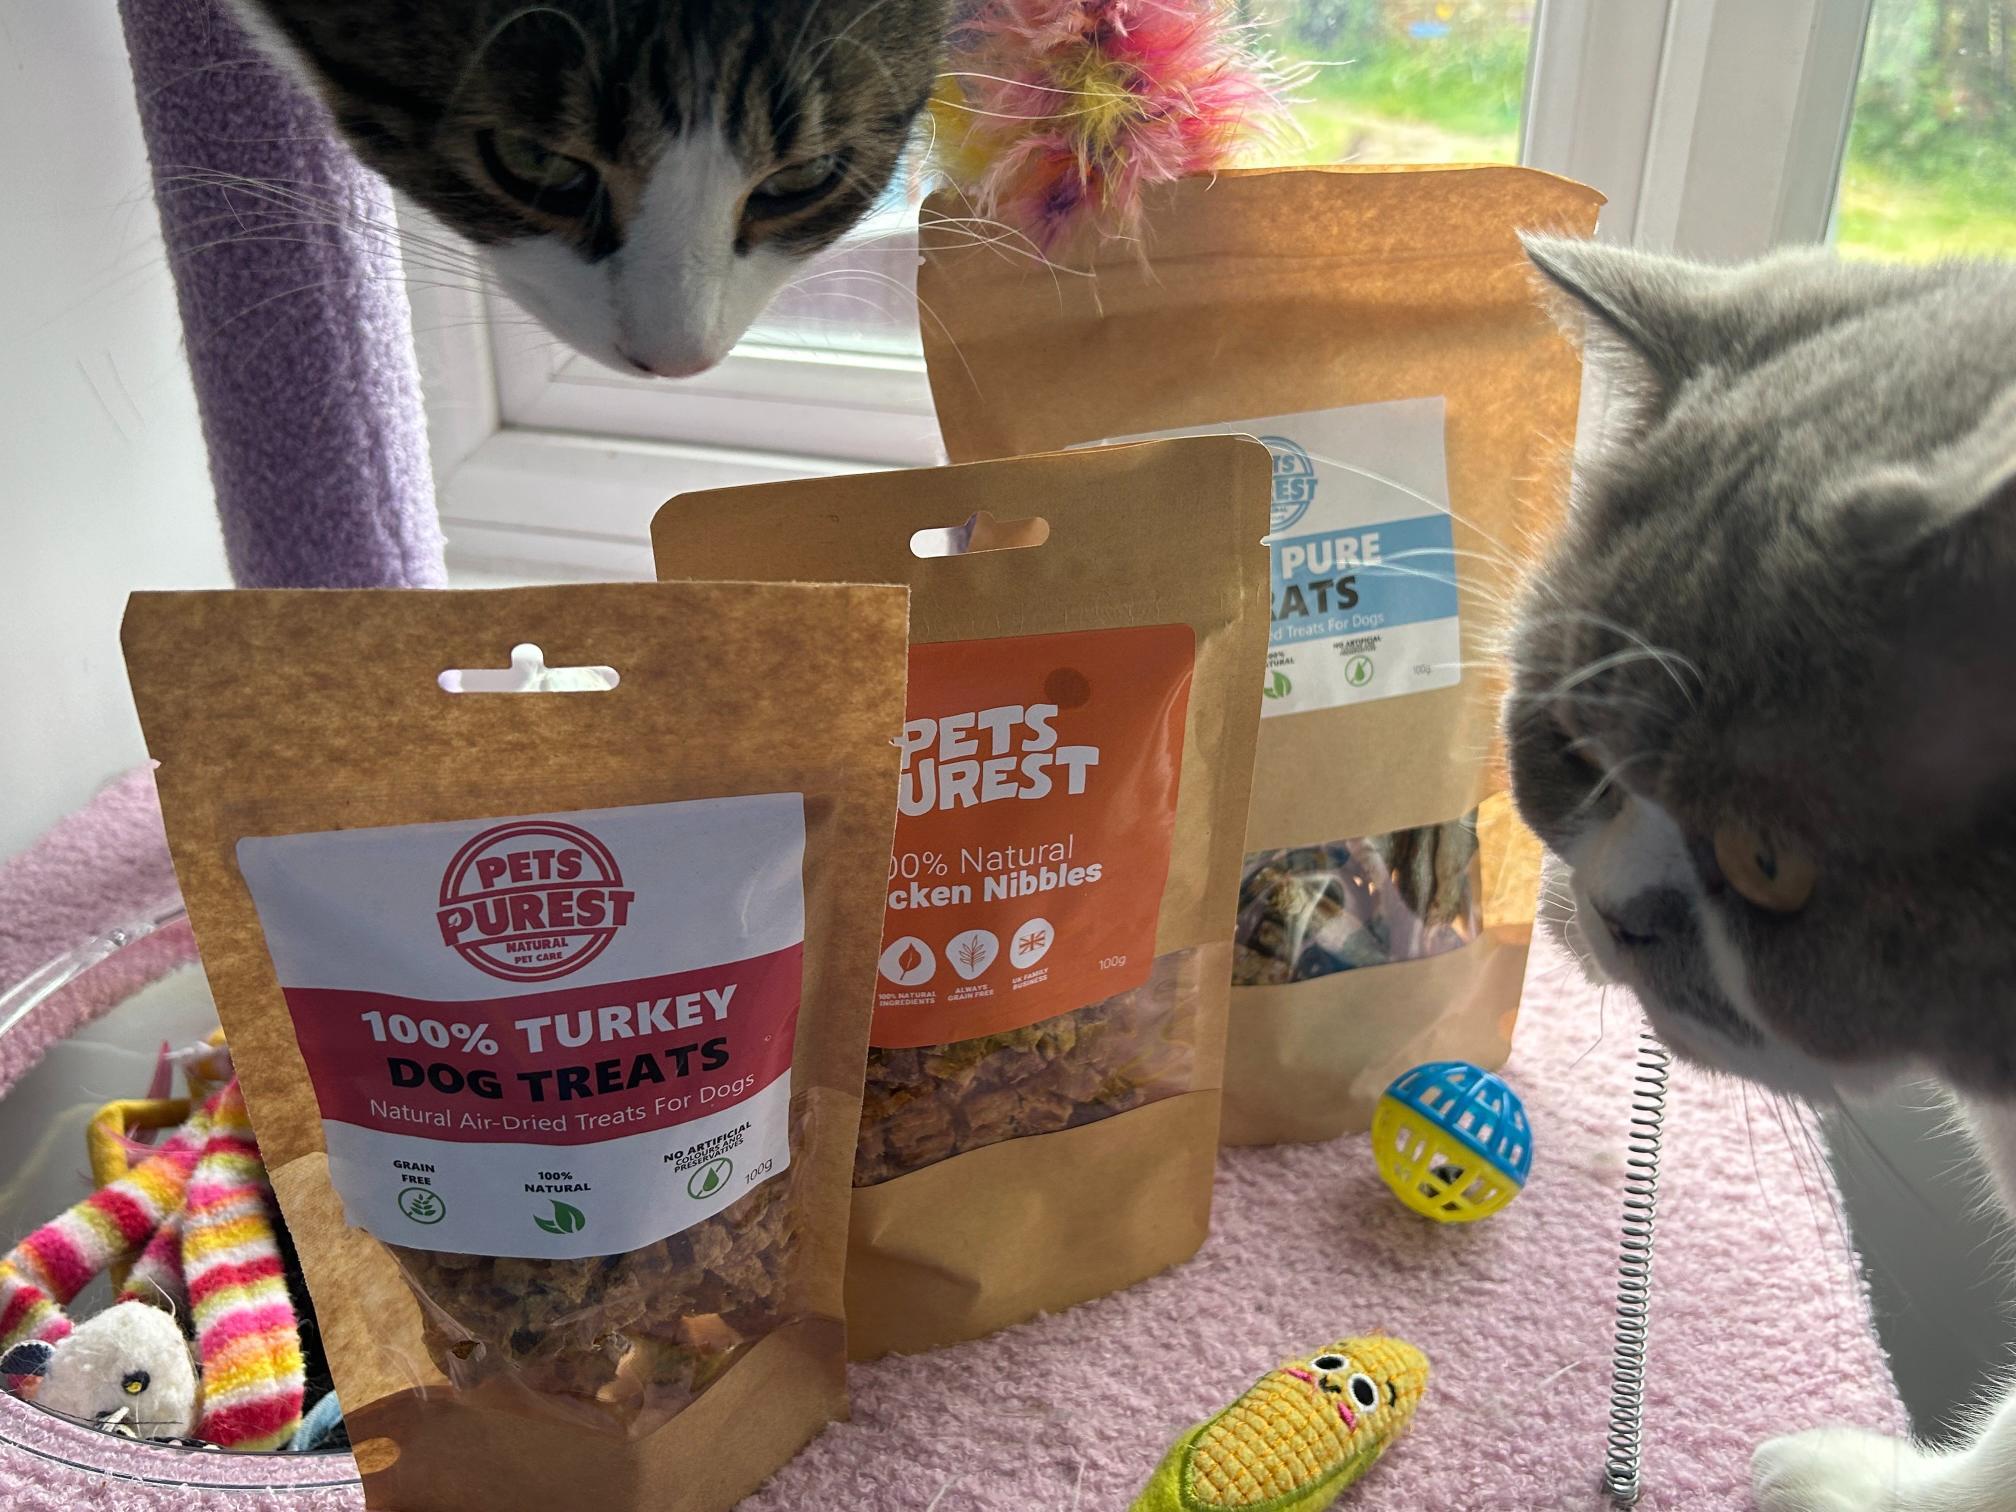 Pets Purest Treats for Cats with two cats